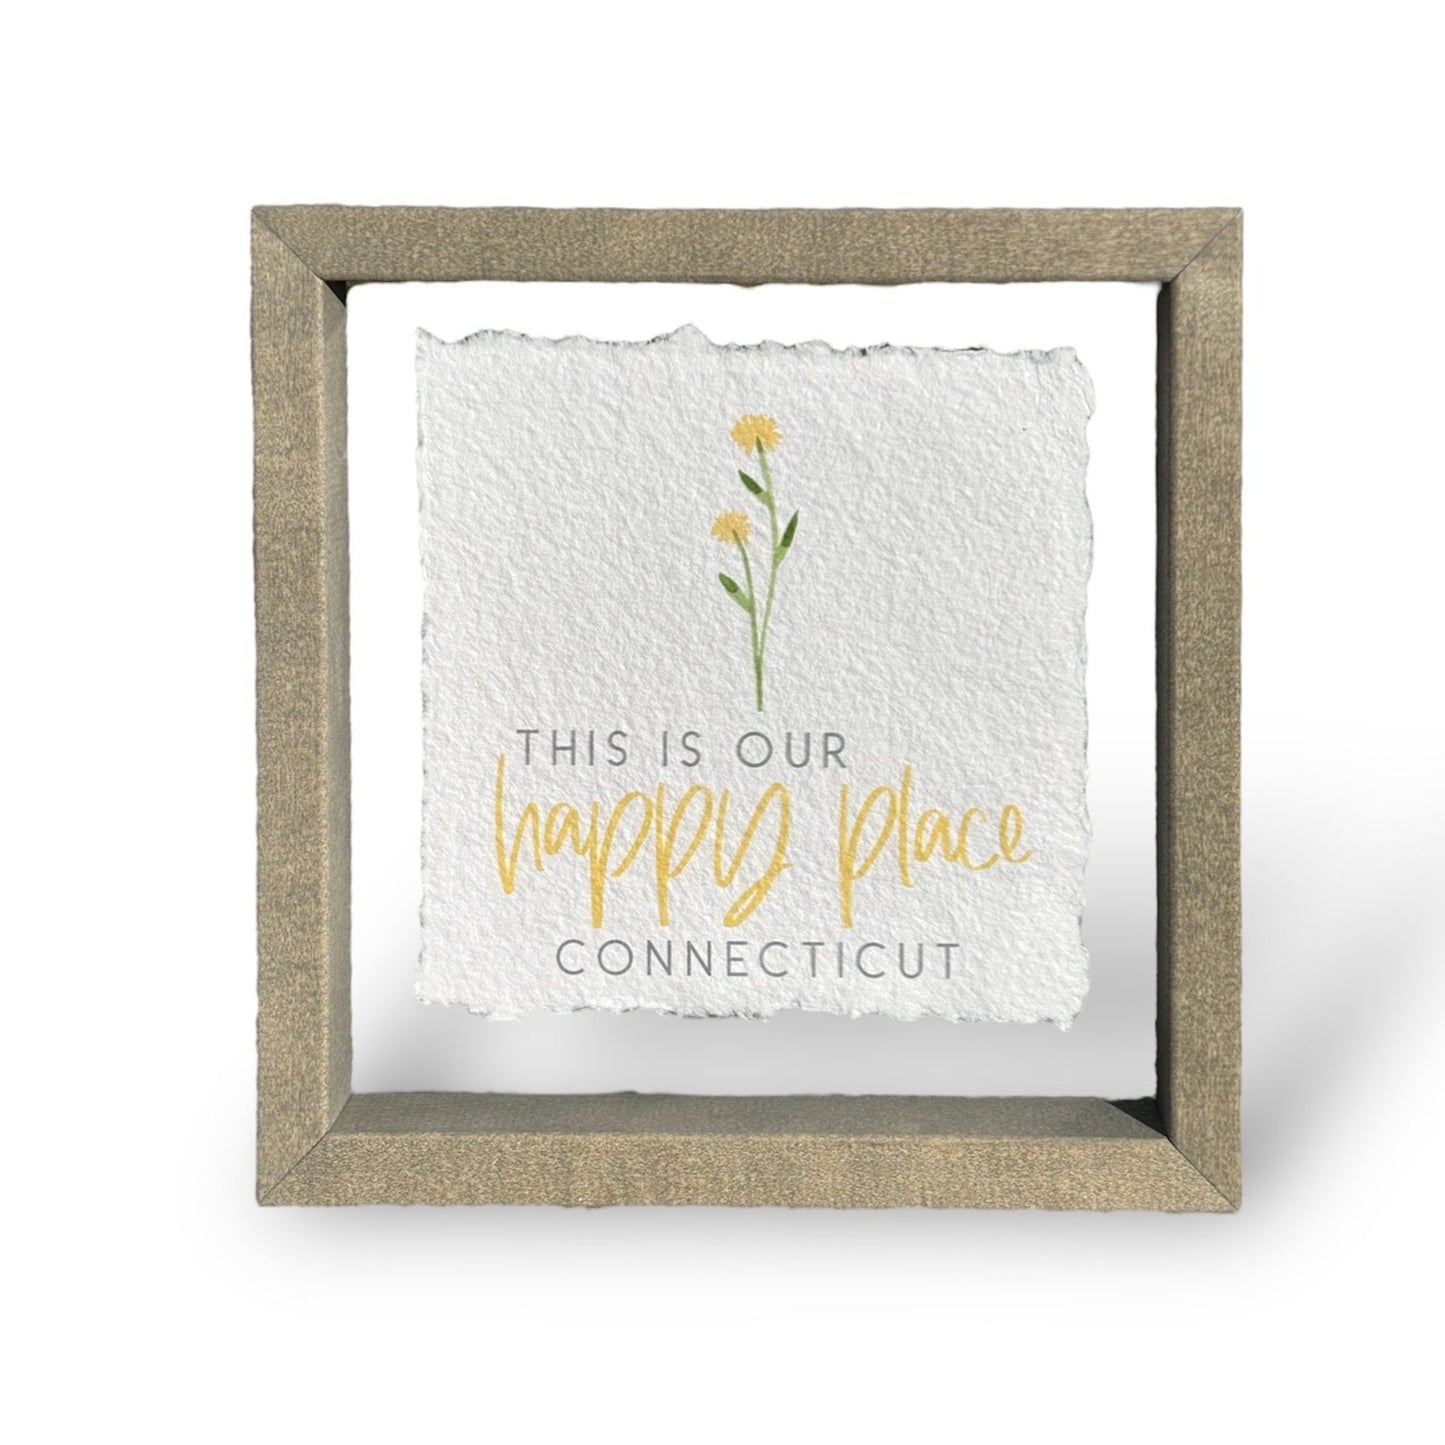 This Is Our Happy Place -  Connecticut -  Floating Frame Art - 10" x 10" - Mellow Monkey